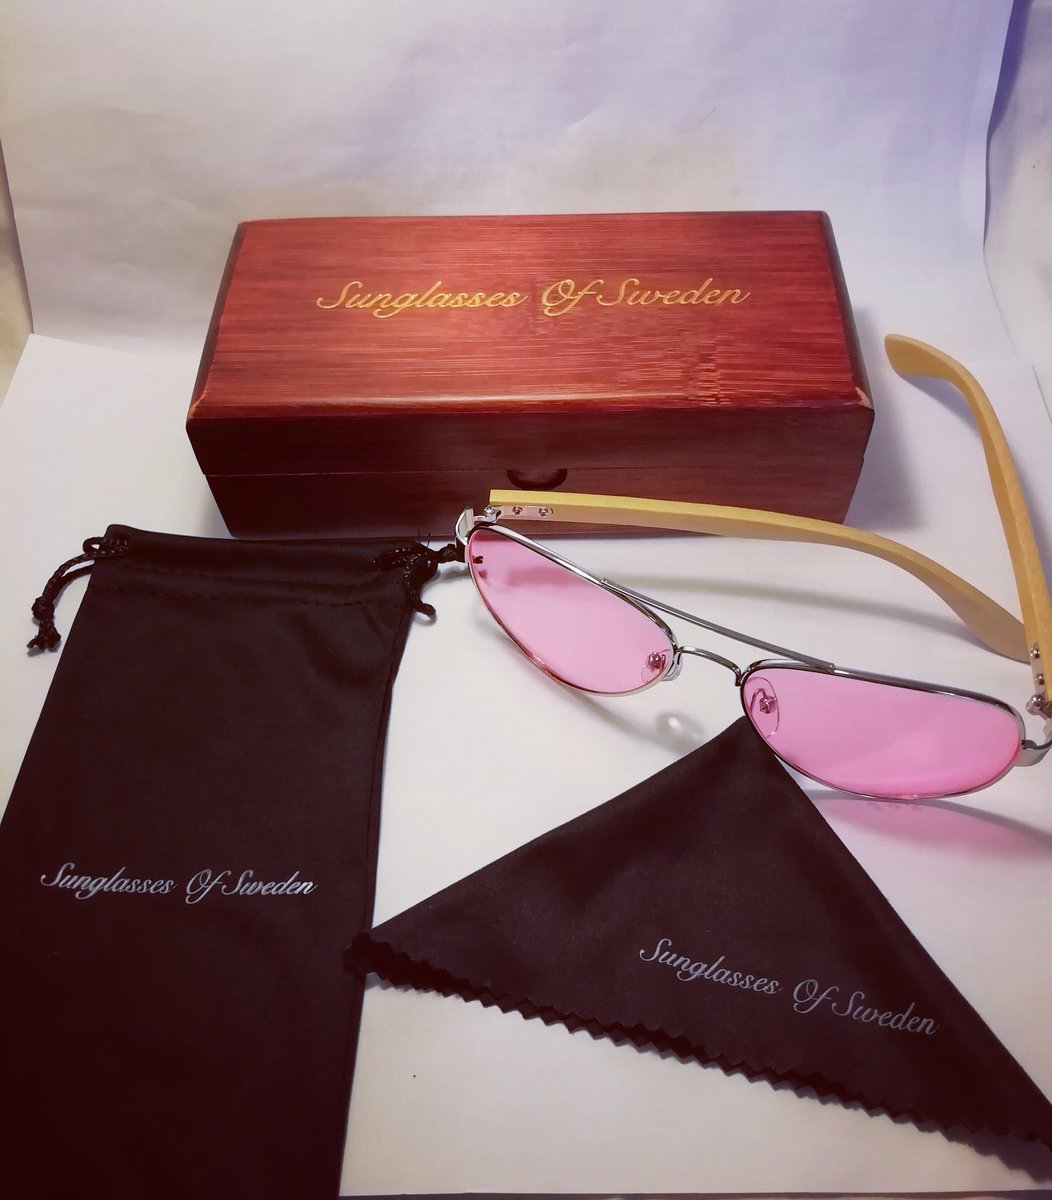 Now you can pre-order our new luxury branded sunglasses! 😎

SIGN UP for newsletter for more details on our website to get super discounts! Link in bio. #shopping #Sunglasses #brandedsunglasses #fashionnova